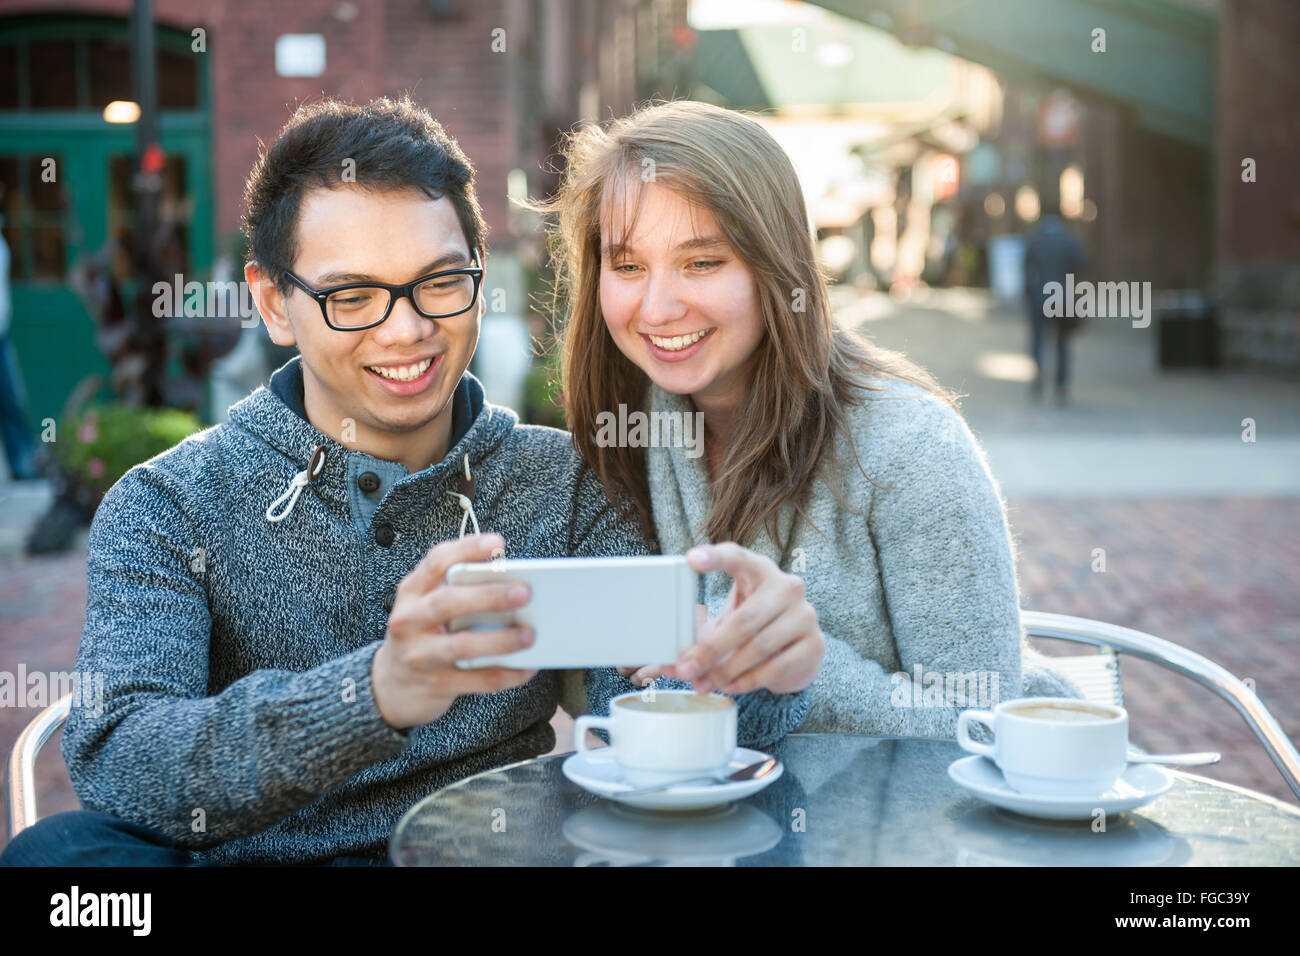 Two young people looking into smartphone on outdoor cafe patio Stock Photo